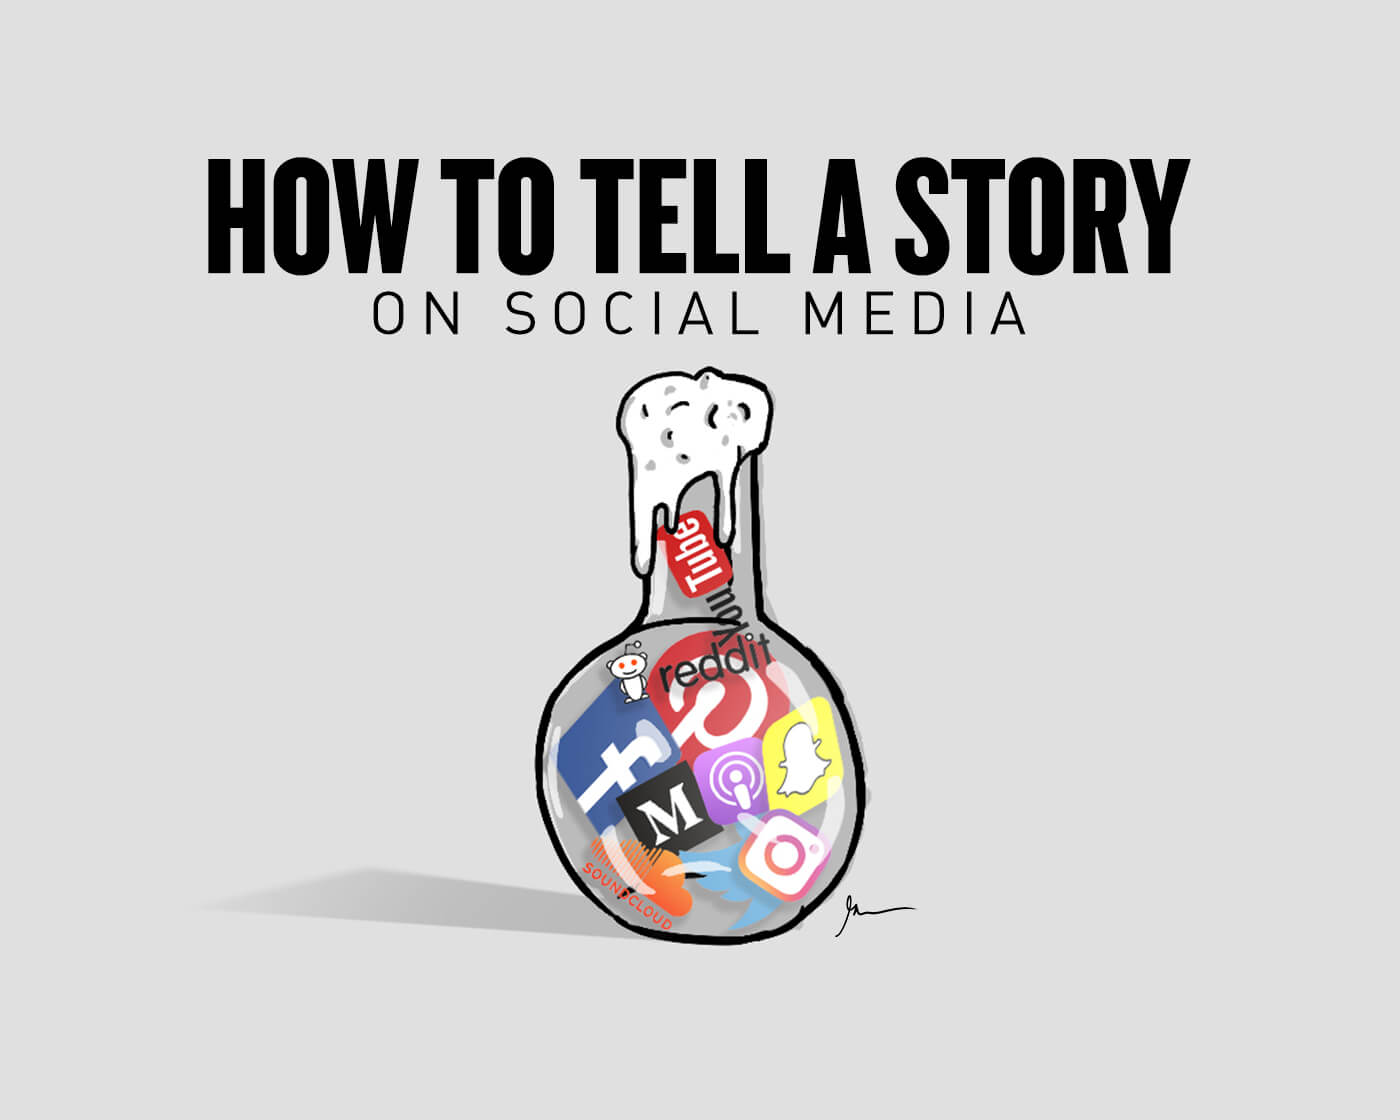 How to Tell a Story on Social Media